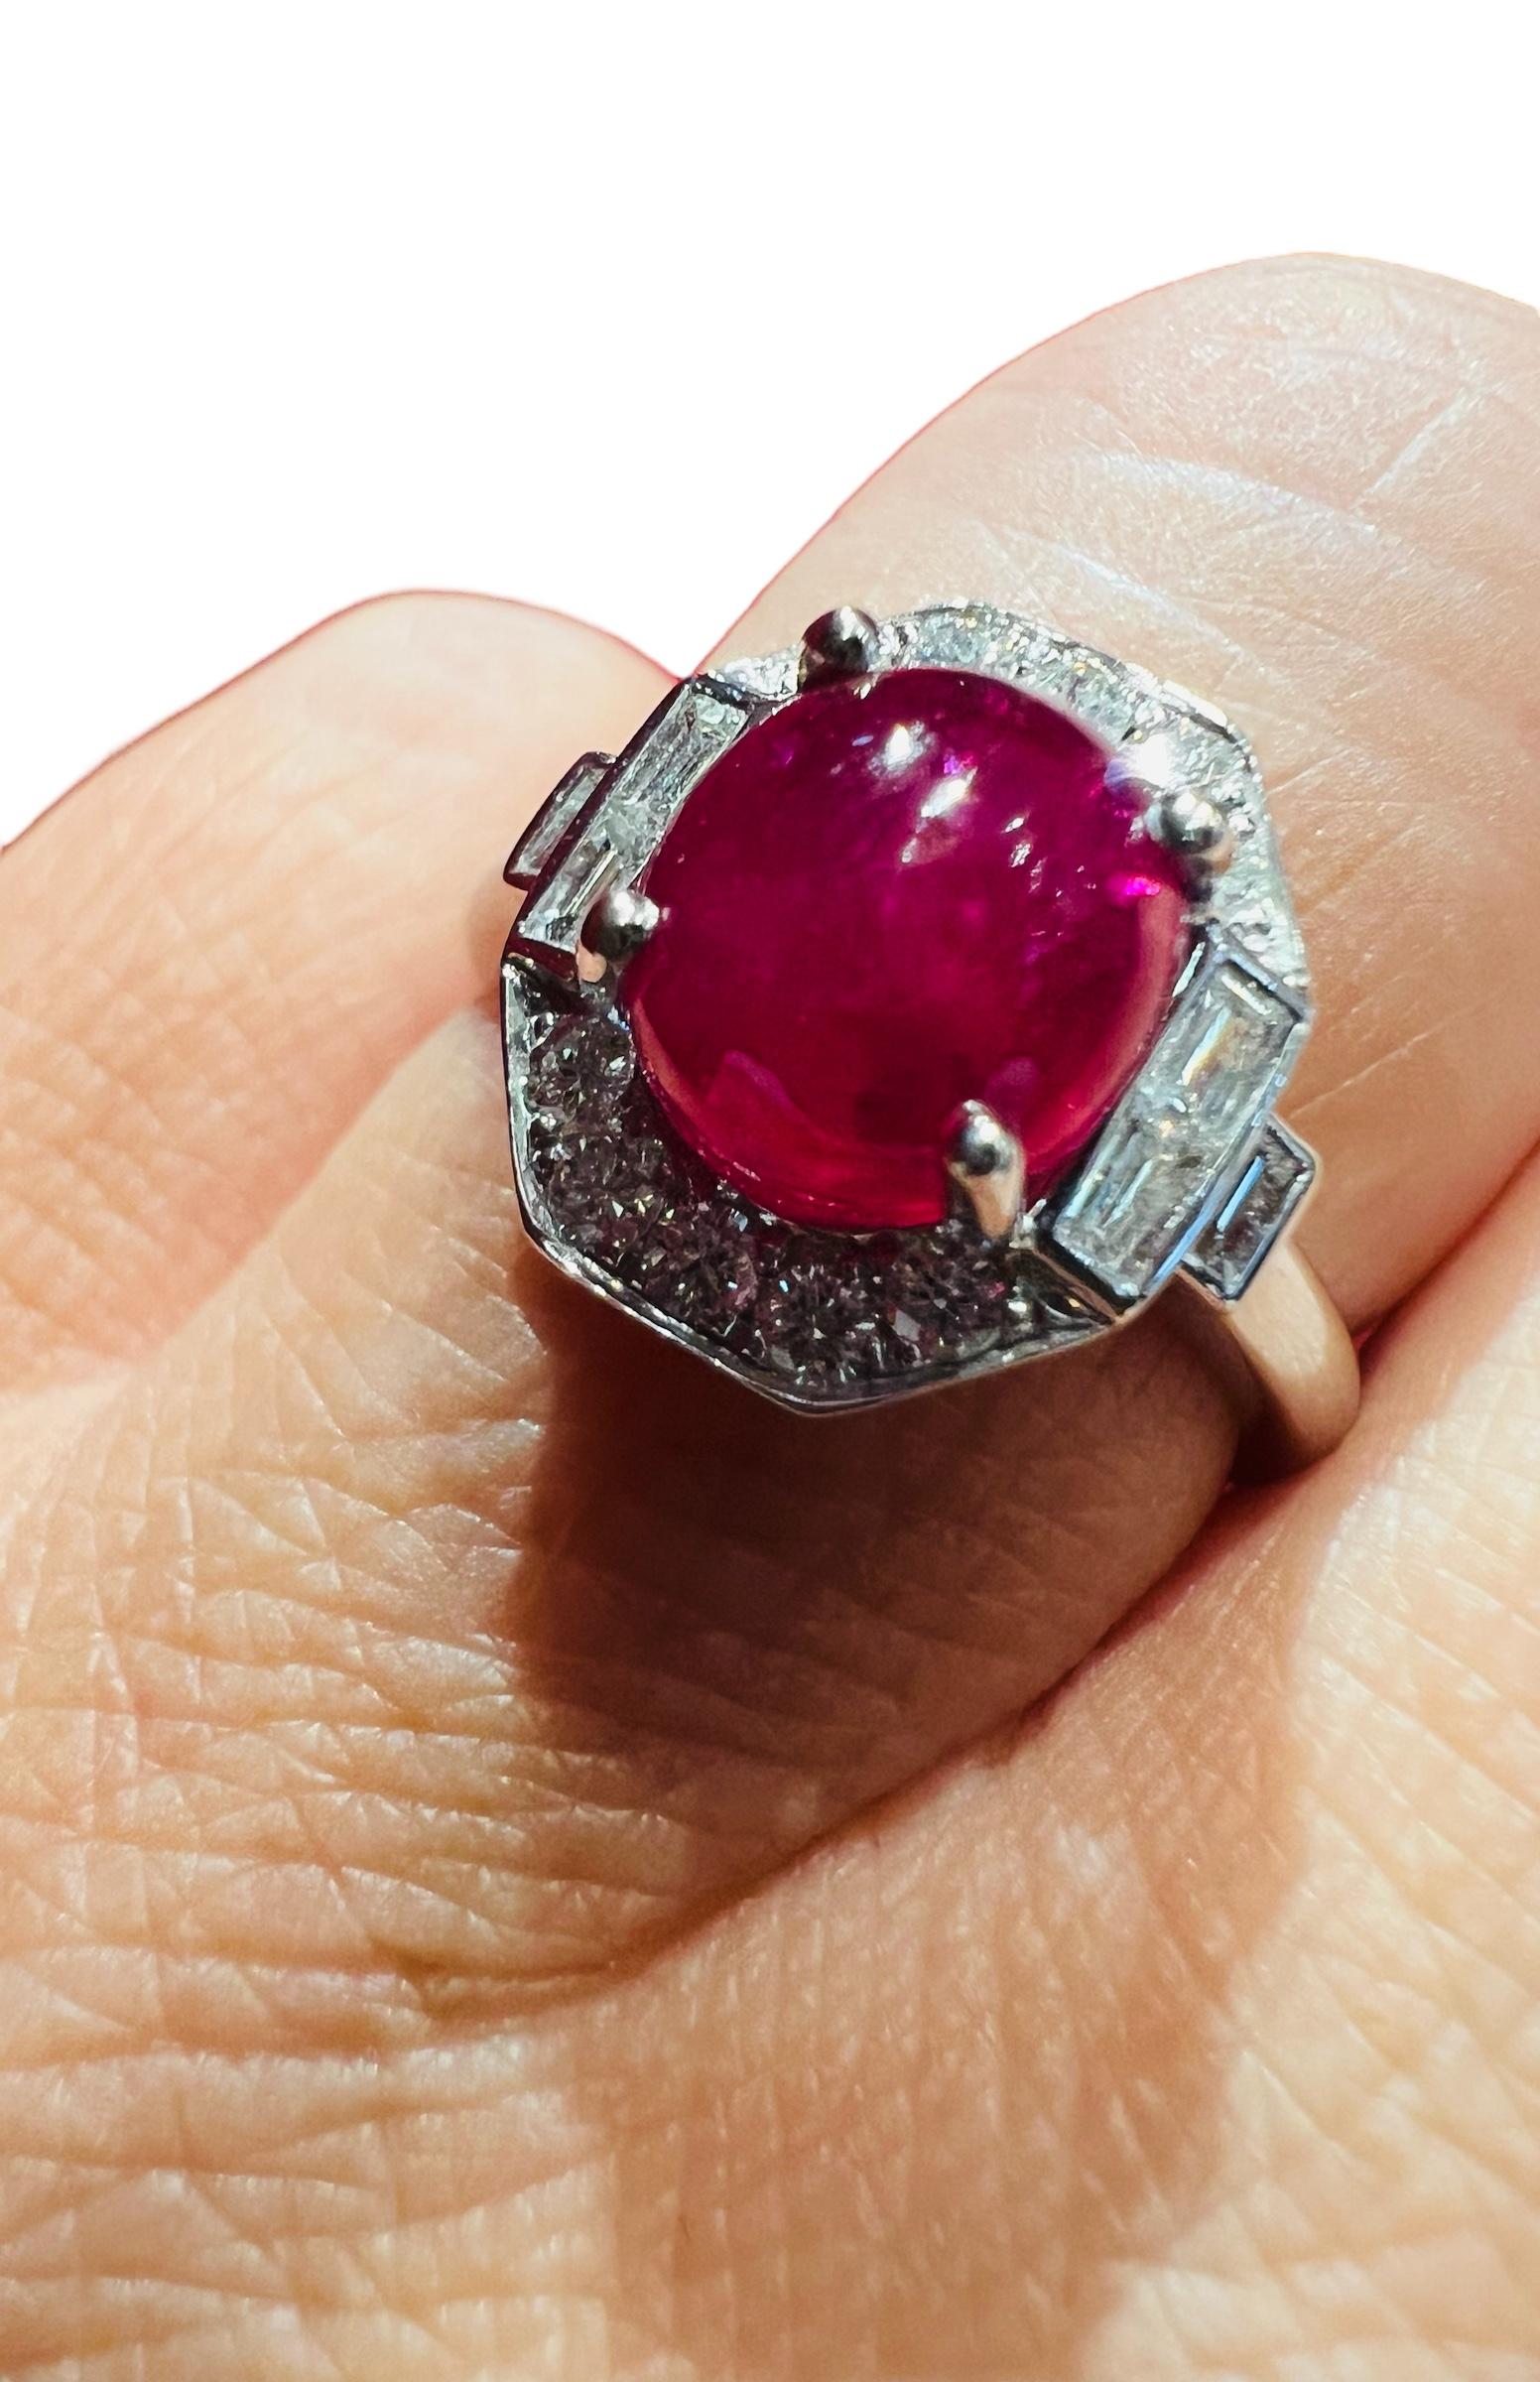 18 Carat Gold Ring Set With A Ruby Cabochon Surrounded By Diamonds 5